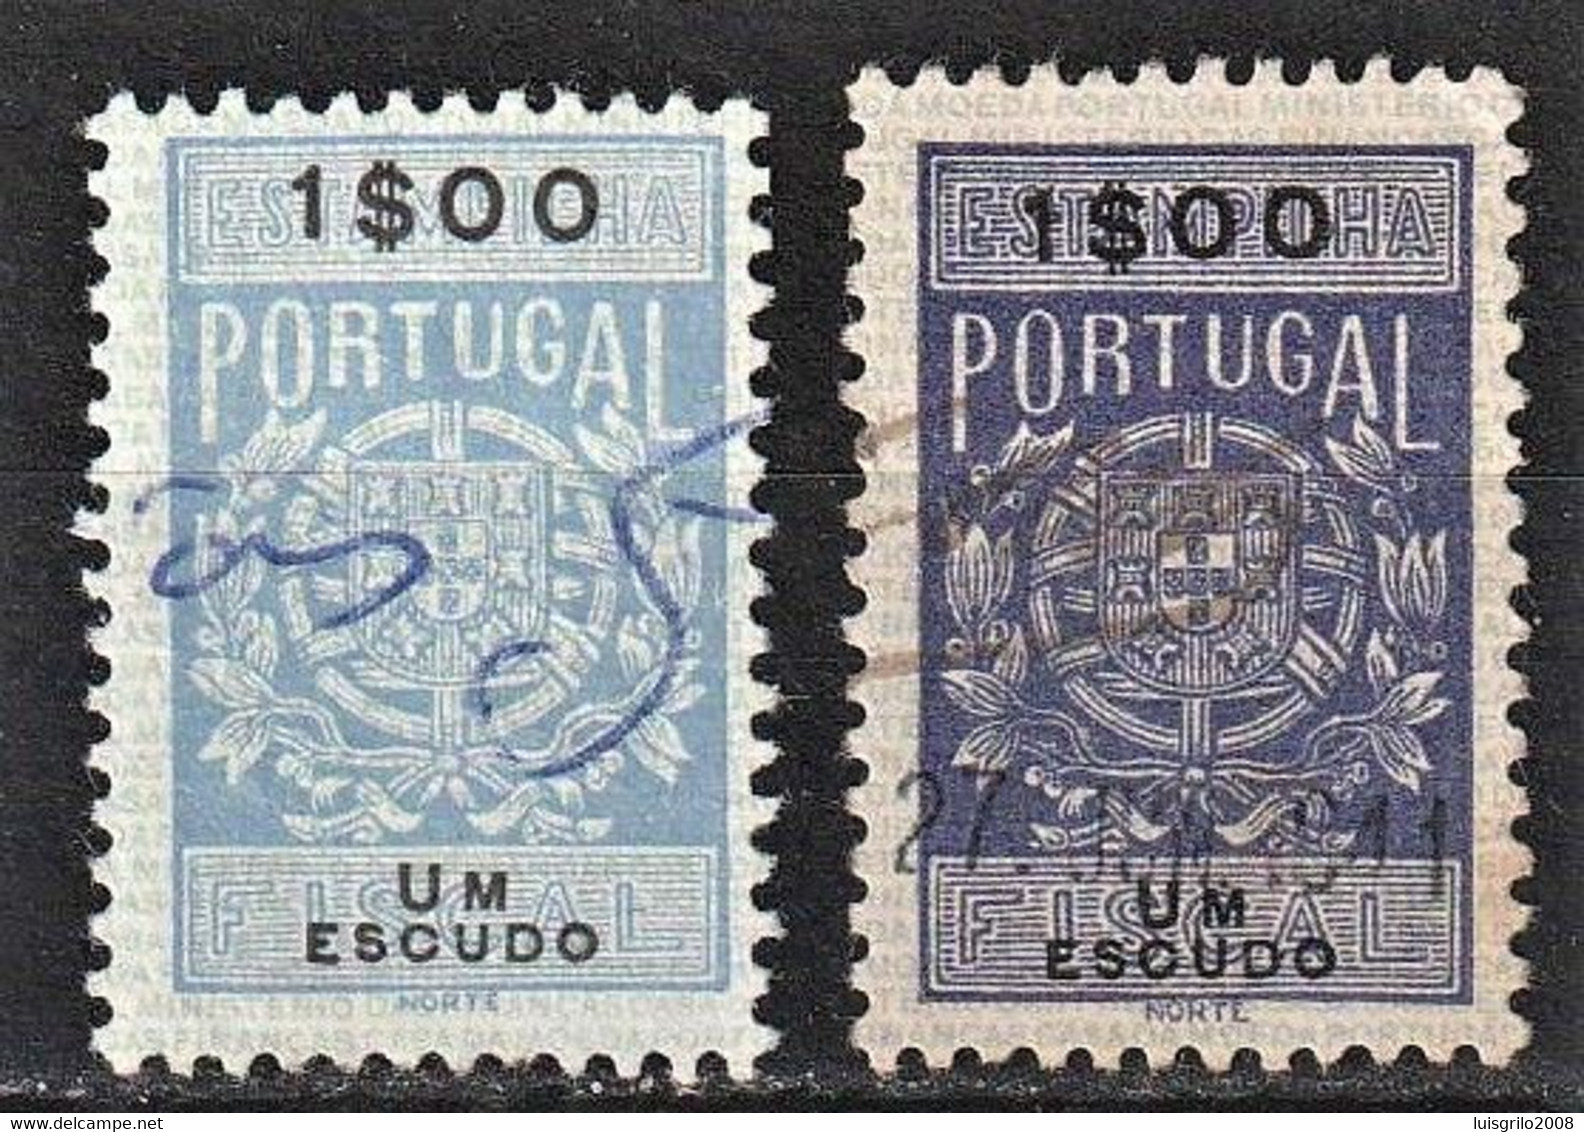 VERY RARE STAMP - Fiscal/ Revenue, Portugal 1940 - Estampilha Fiscal -|- 1$00 - DIFFERENT COLOR - Gebraucht